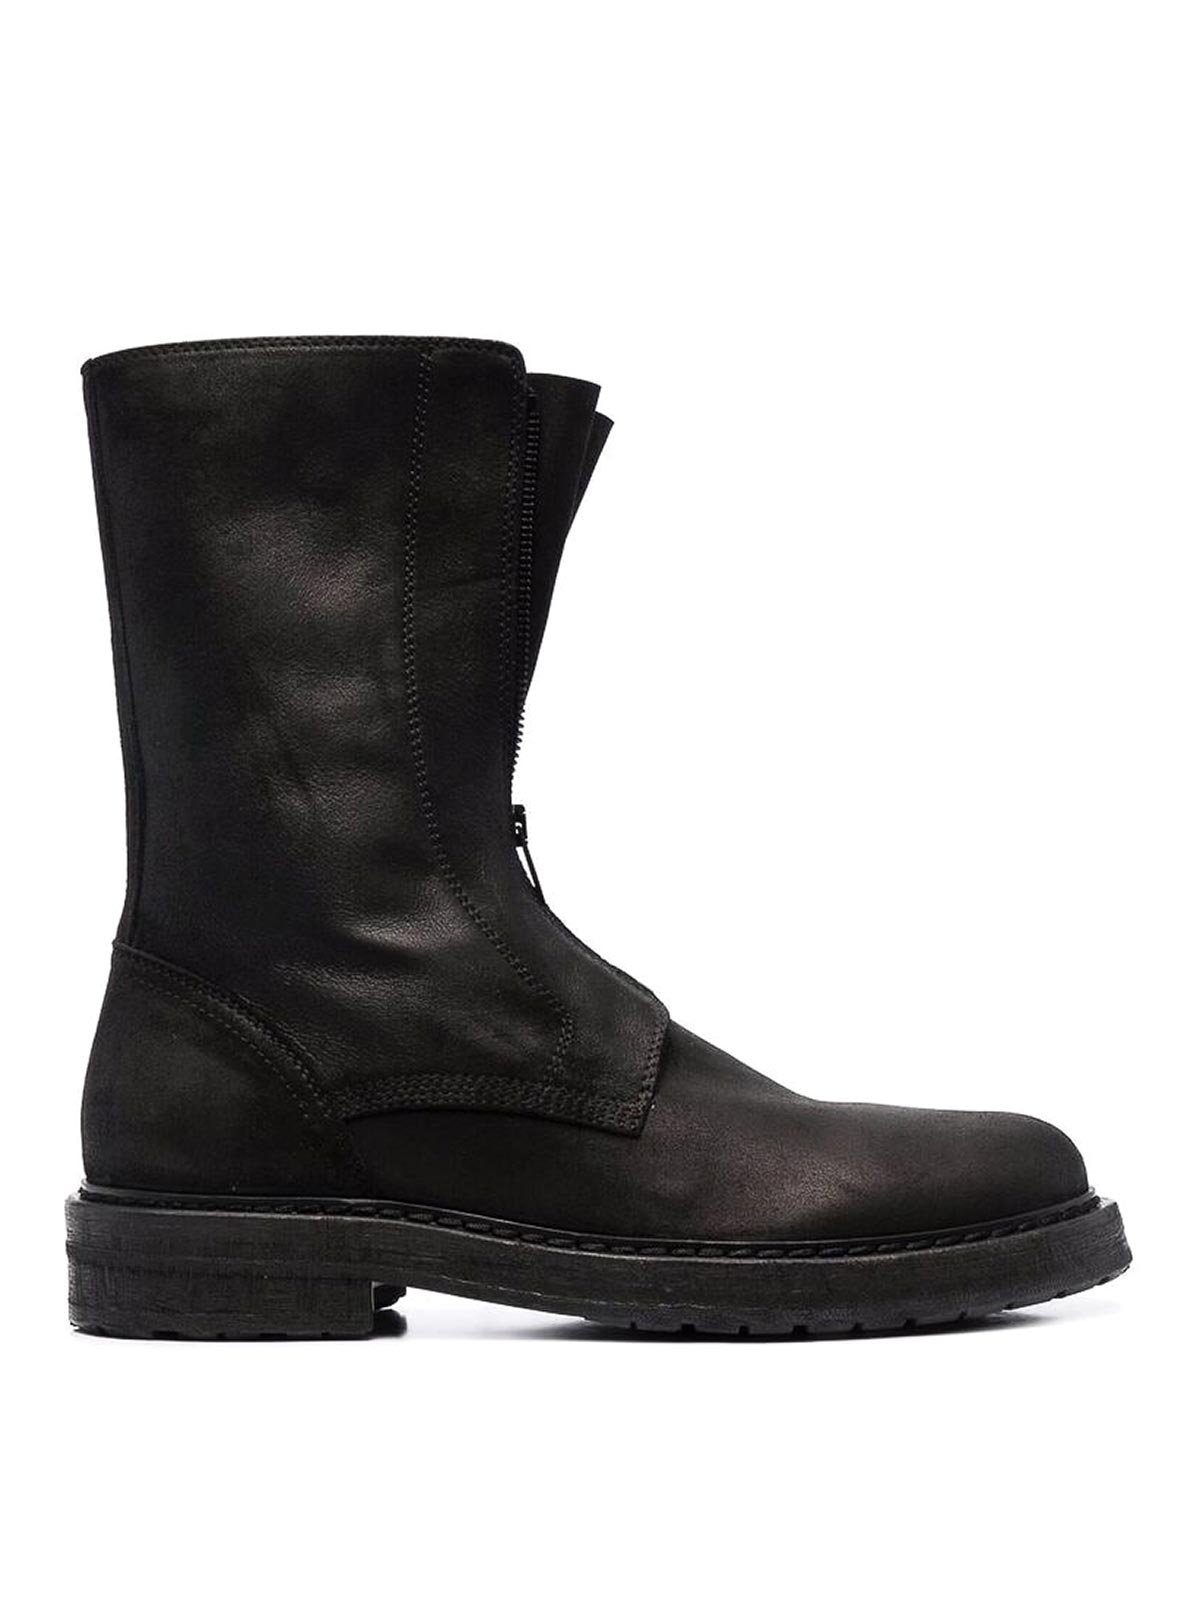 Shop Ann Demeulemeester Black Willy Boots